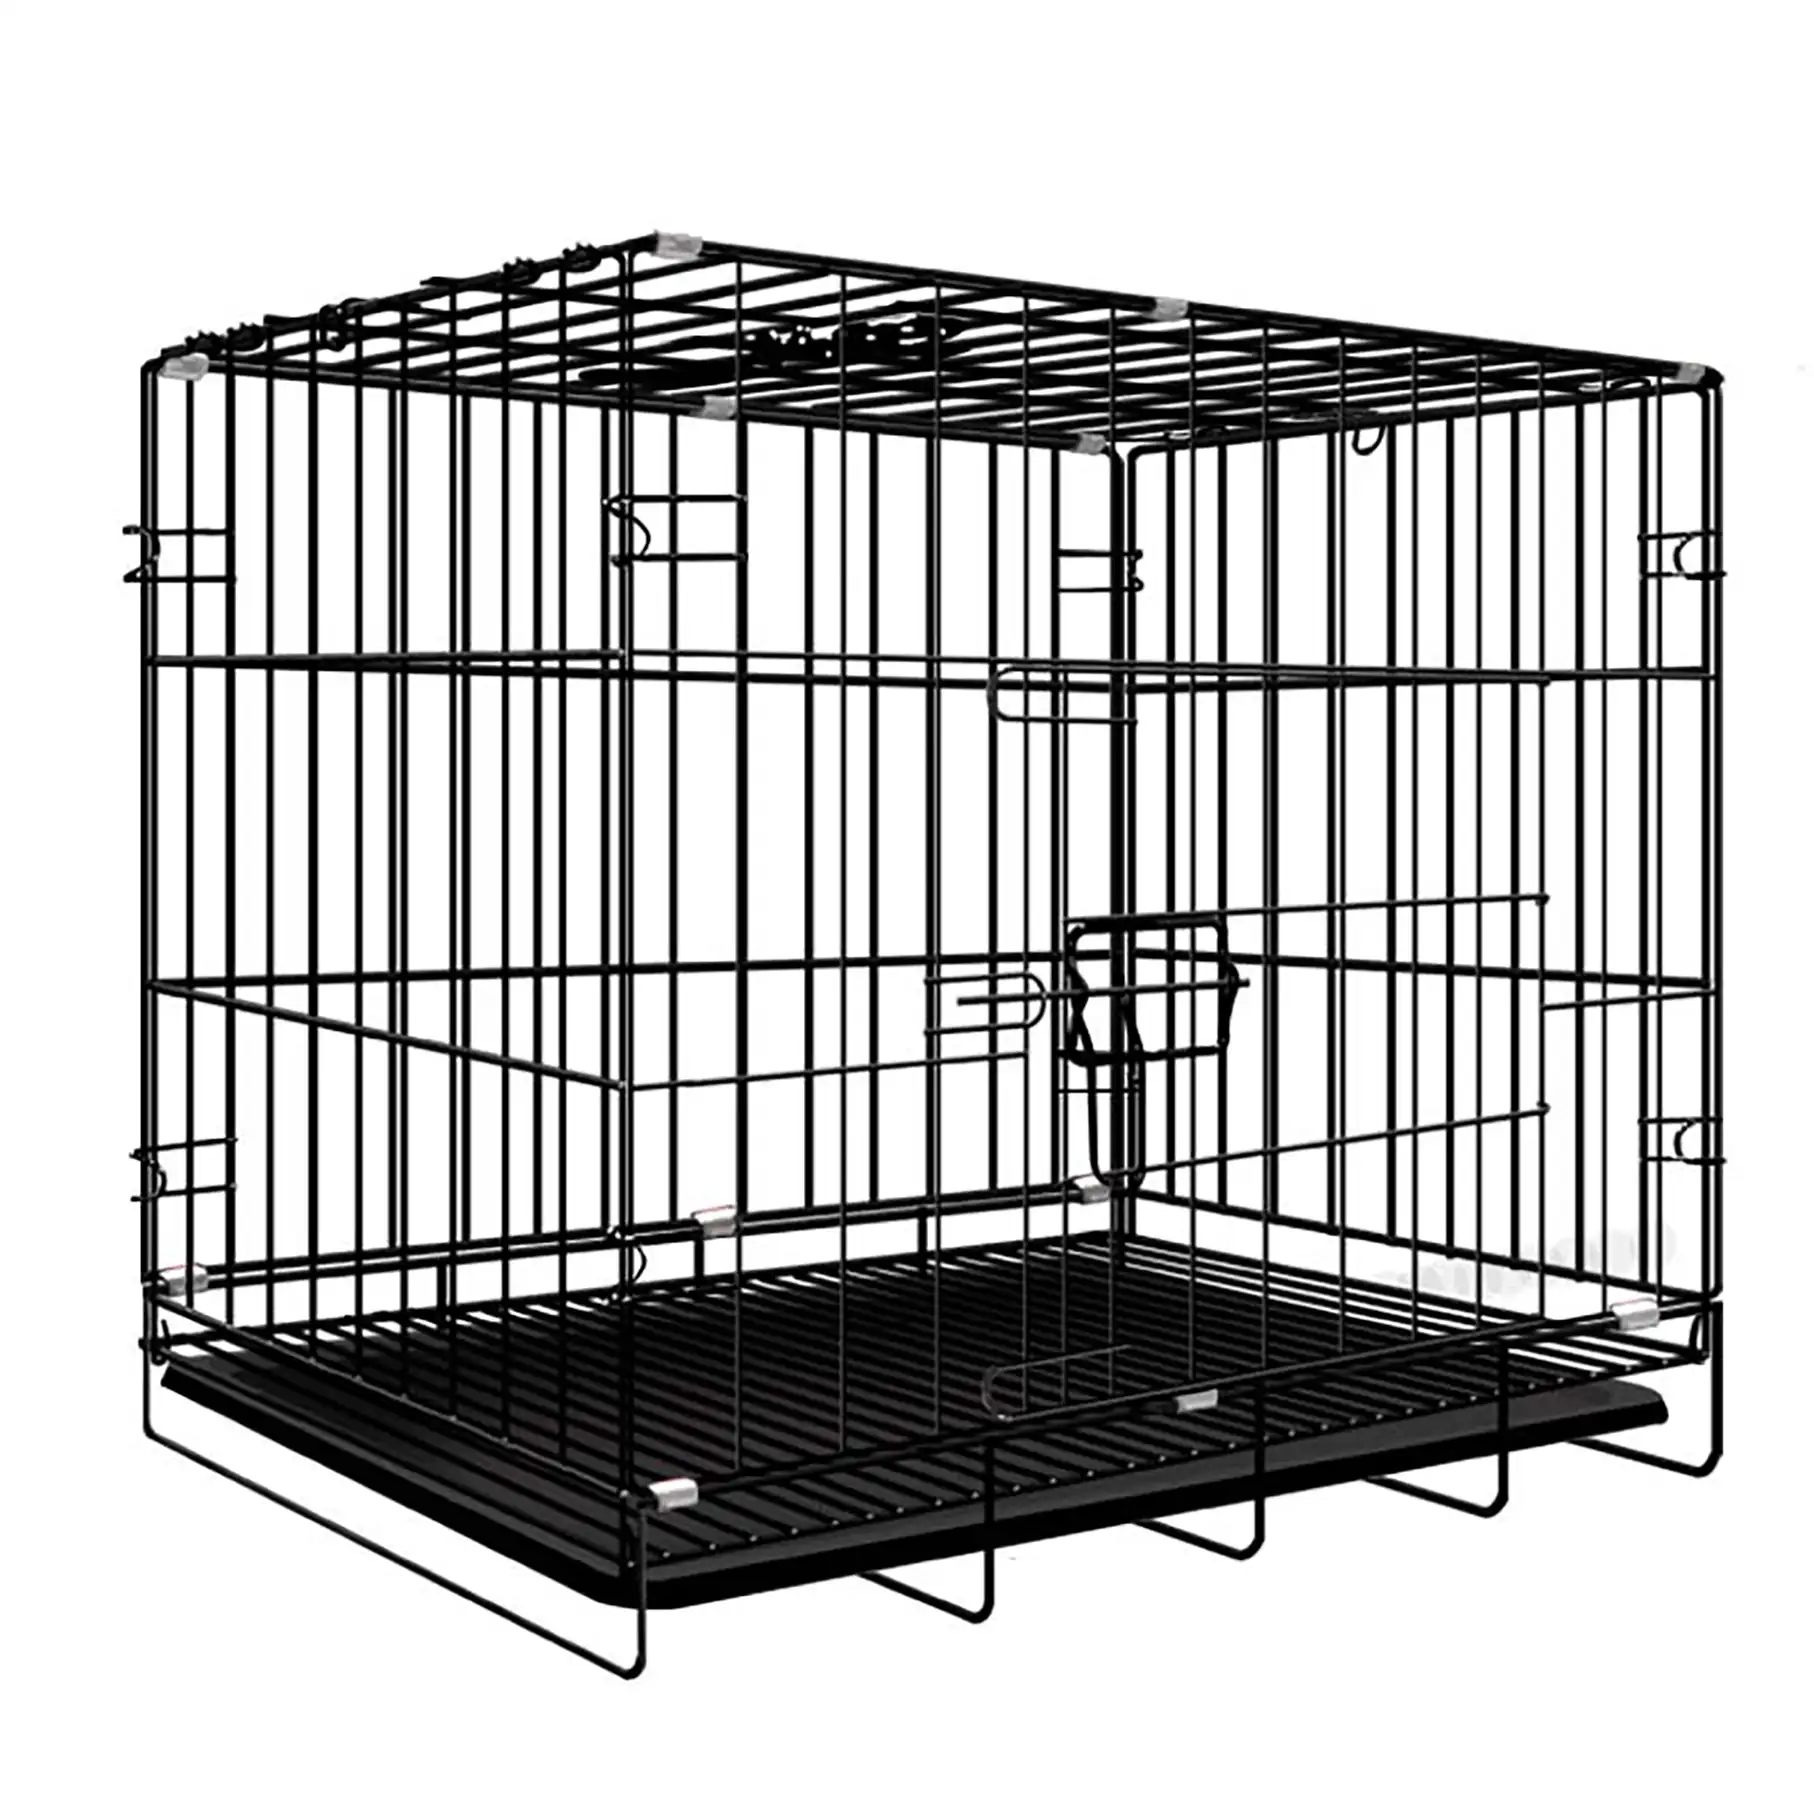 High Quality Heavy Duty Pet Breeding Cages Metal Wire Large Dog Kennels